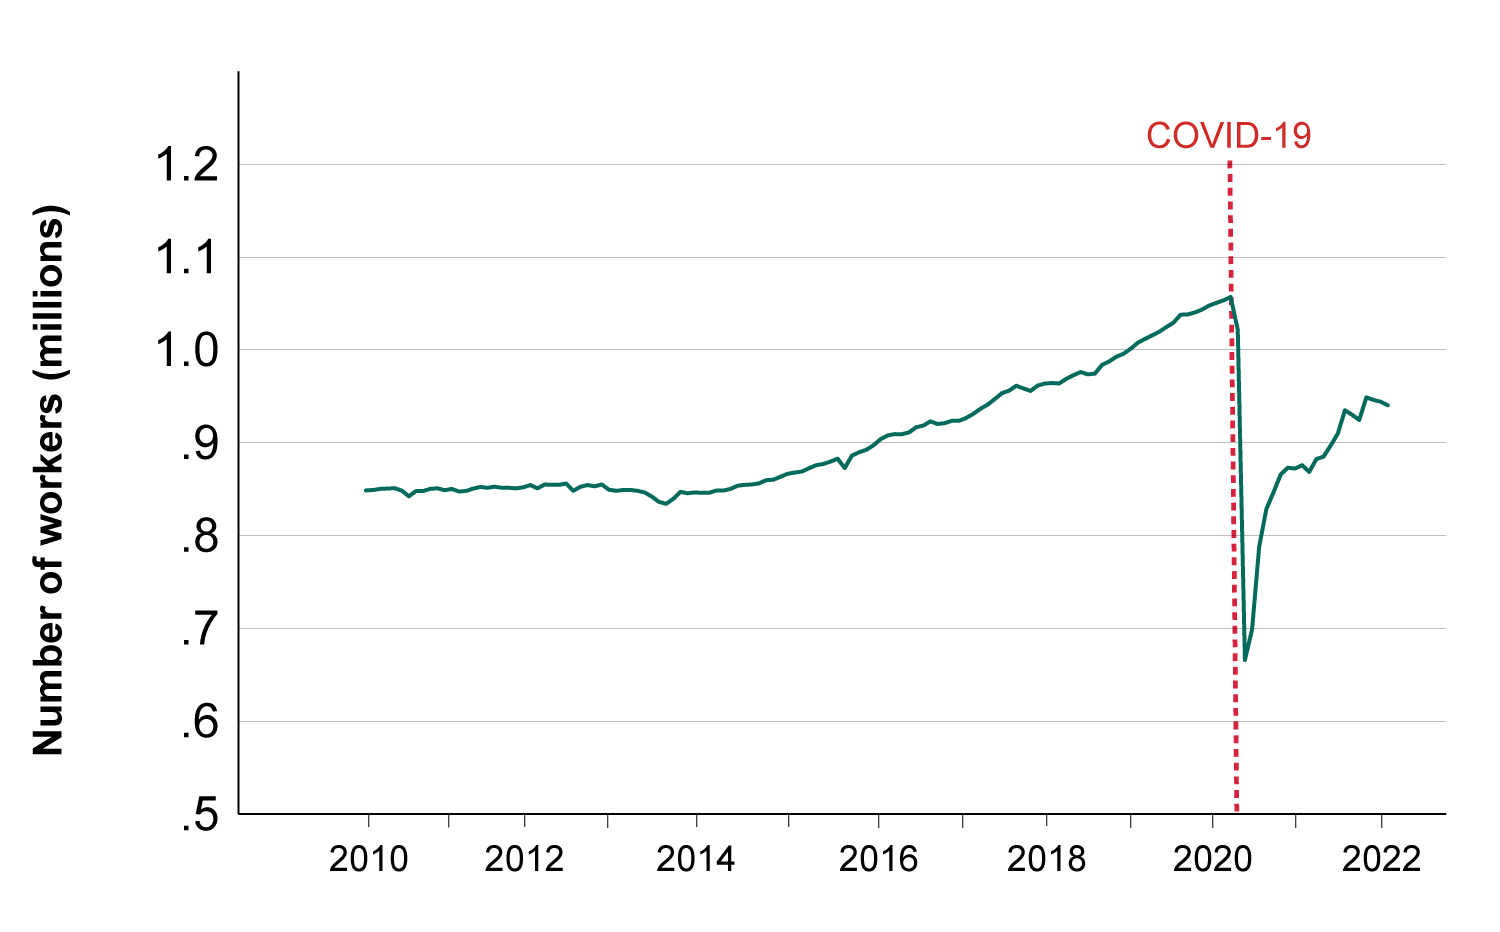 Source: U.S. Bureau of Labor Statistics. “Current Employment Statistics.” Series Code: CES6562440001. Available at https://beta.bls.gov/dataViewer/view/timeseries/CES6562440001.